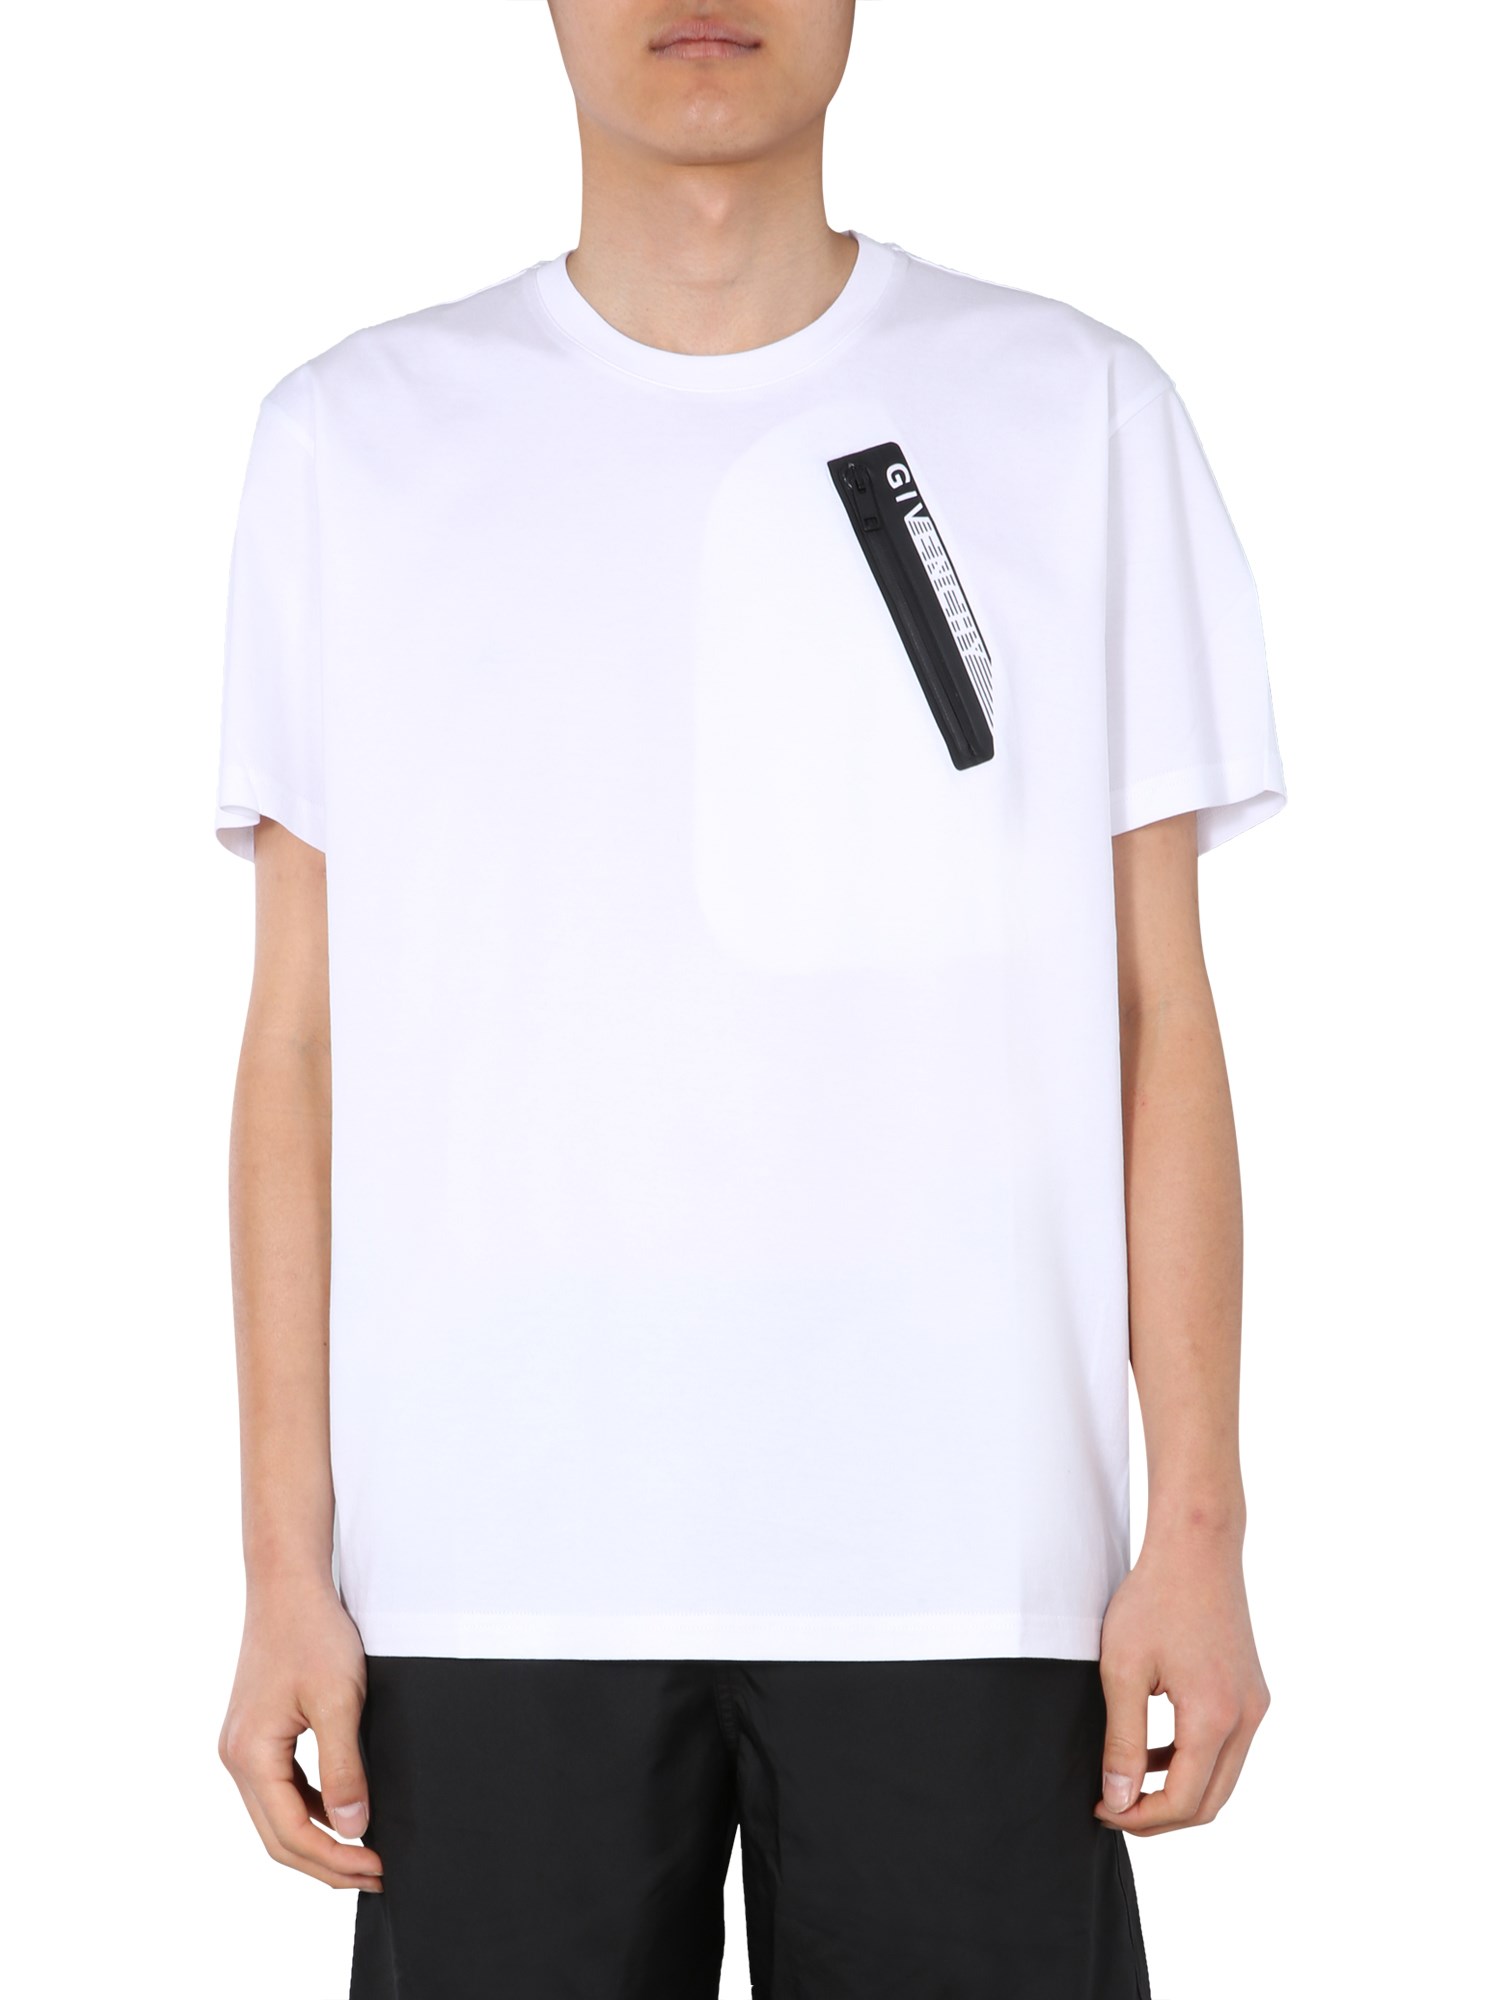 GIVENCHY ROUND NECK T-SHIRT,175207